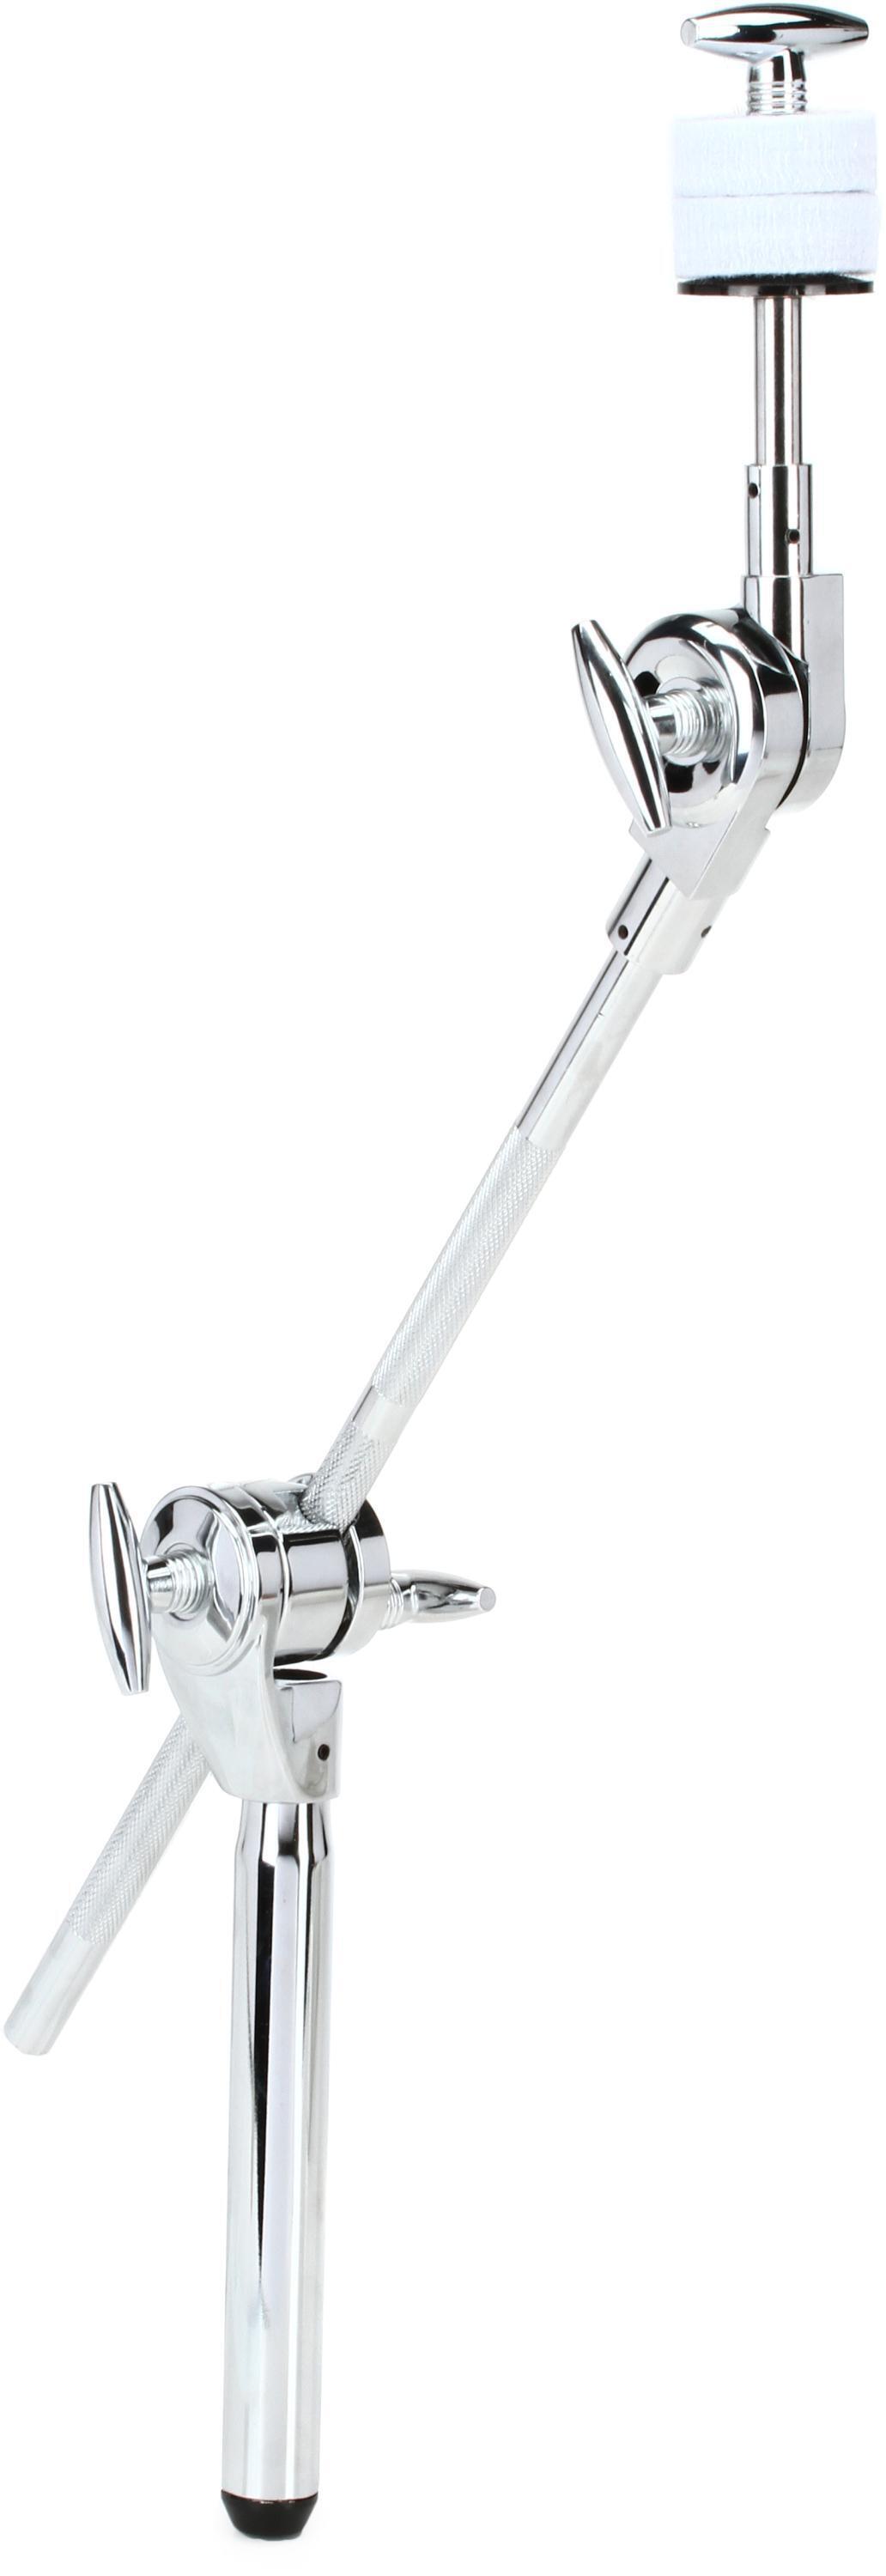 Gretsch Drums GRGACBA Cymbal Boom Arm | Sweetwater